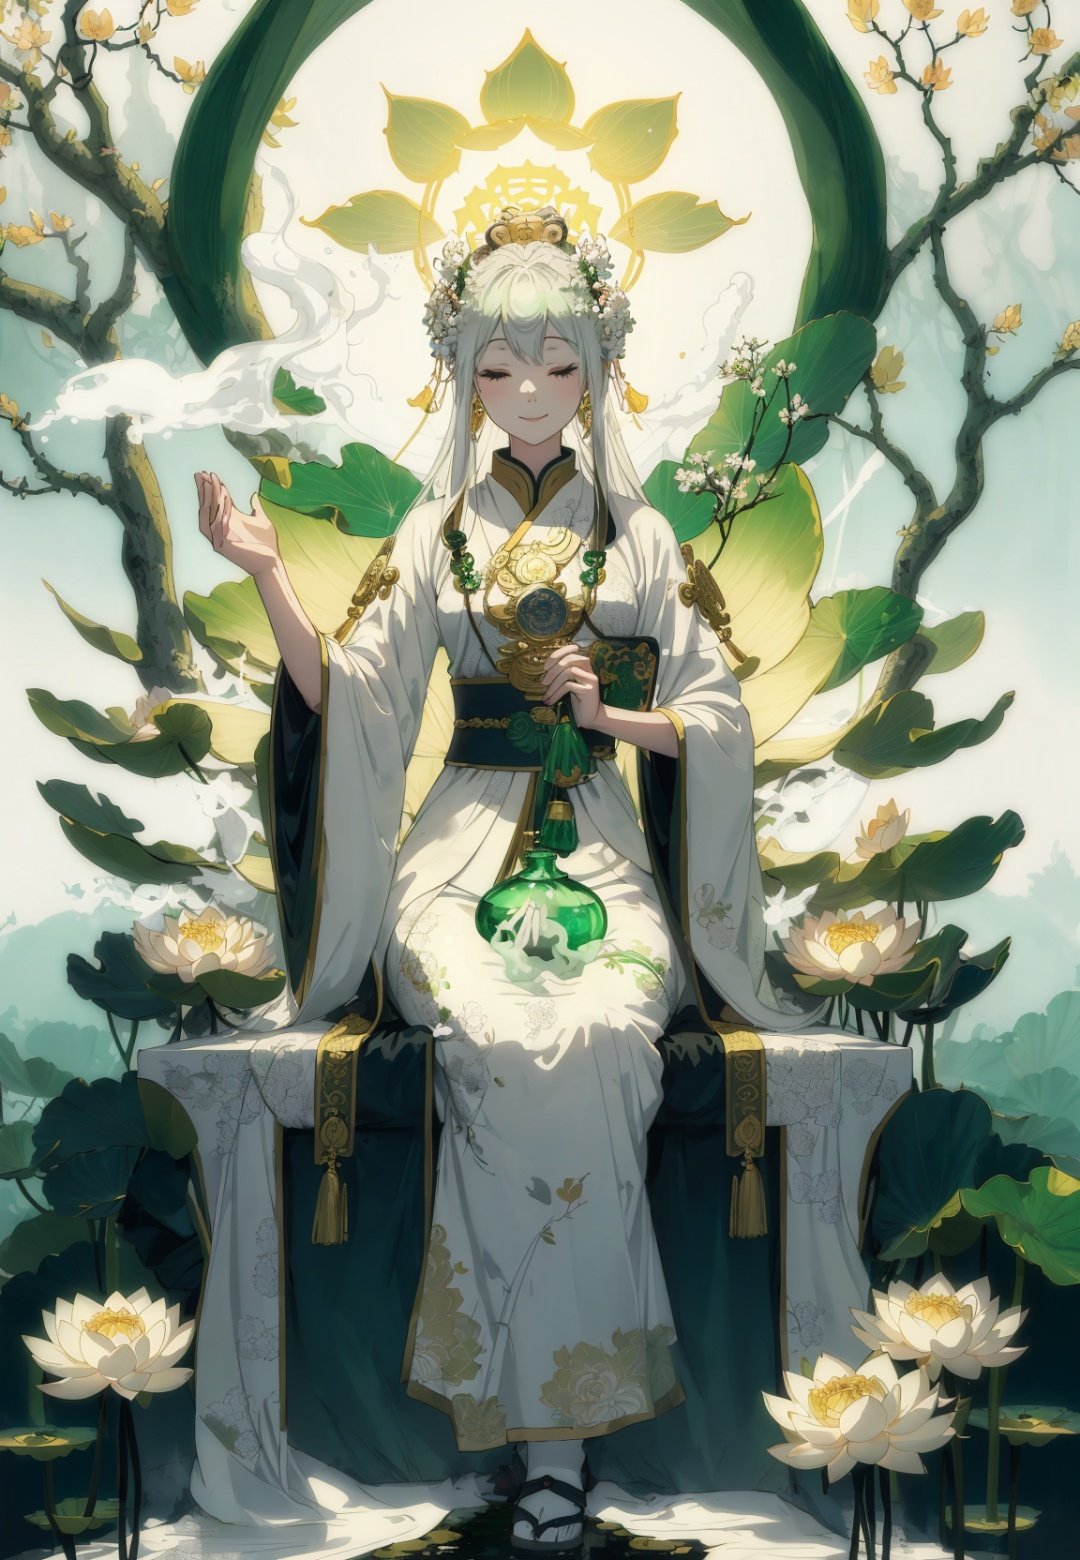 
dreamy, serene, white and green:1.2),
(full body, sitting, Guanyin with jade bottle:1.1),(praying hands),(blessing),(smiling),(compassionate),
(lotus throne, floating, below Guanyin:1.2),
(lotus flowers, branches),
(dry ice, fog, below:1.1),
(from front),(medium shot),
As she sits on a floating lotus throne, Guanyin holds a jade bottle and makes a praying gesture. She smiles and blesses the world with her compassion. Behind her, lotus flowers and branches surround her, creating a natural and peaceful backdrop. Below her, dry ice forms a fog that adds to the dreamy atmosphere. The main colors are white and green, creating a pure and harmonious mood.
(magazine:1.3), (cover-style:1.3), fashionable, woman, vibrant, outfit, posing, front, colorful, dynamic, background, elements, confident, expression, holding, statement, accessory, majestic, coiled, around, touch, scene, text, cover, bold, attention-grabbing, title, stylish, font, catchy, headline, larger, striking, modern, trendy, focus, fashion,, baisixuegao,white pantyhose,
